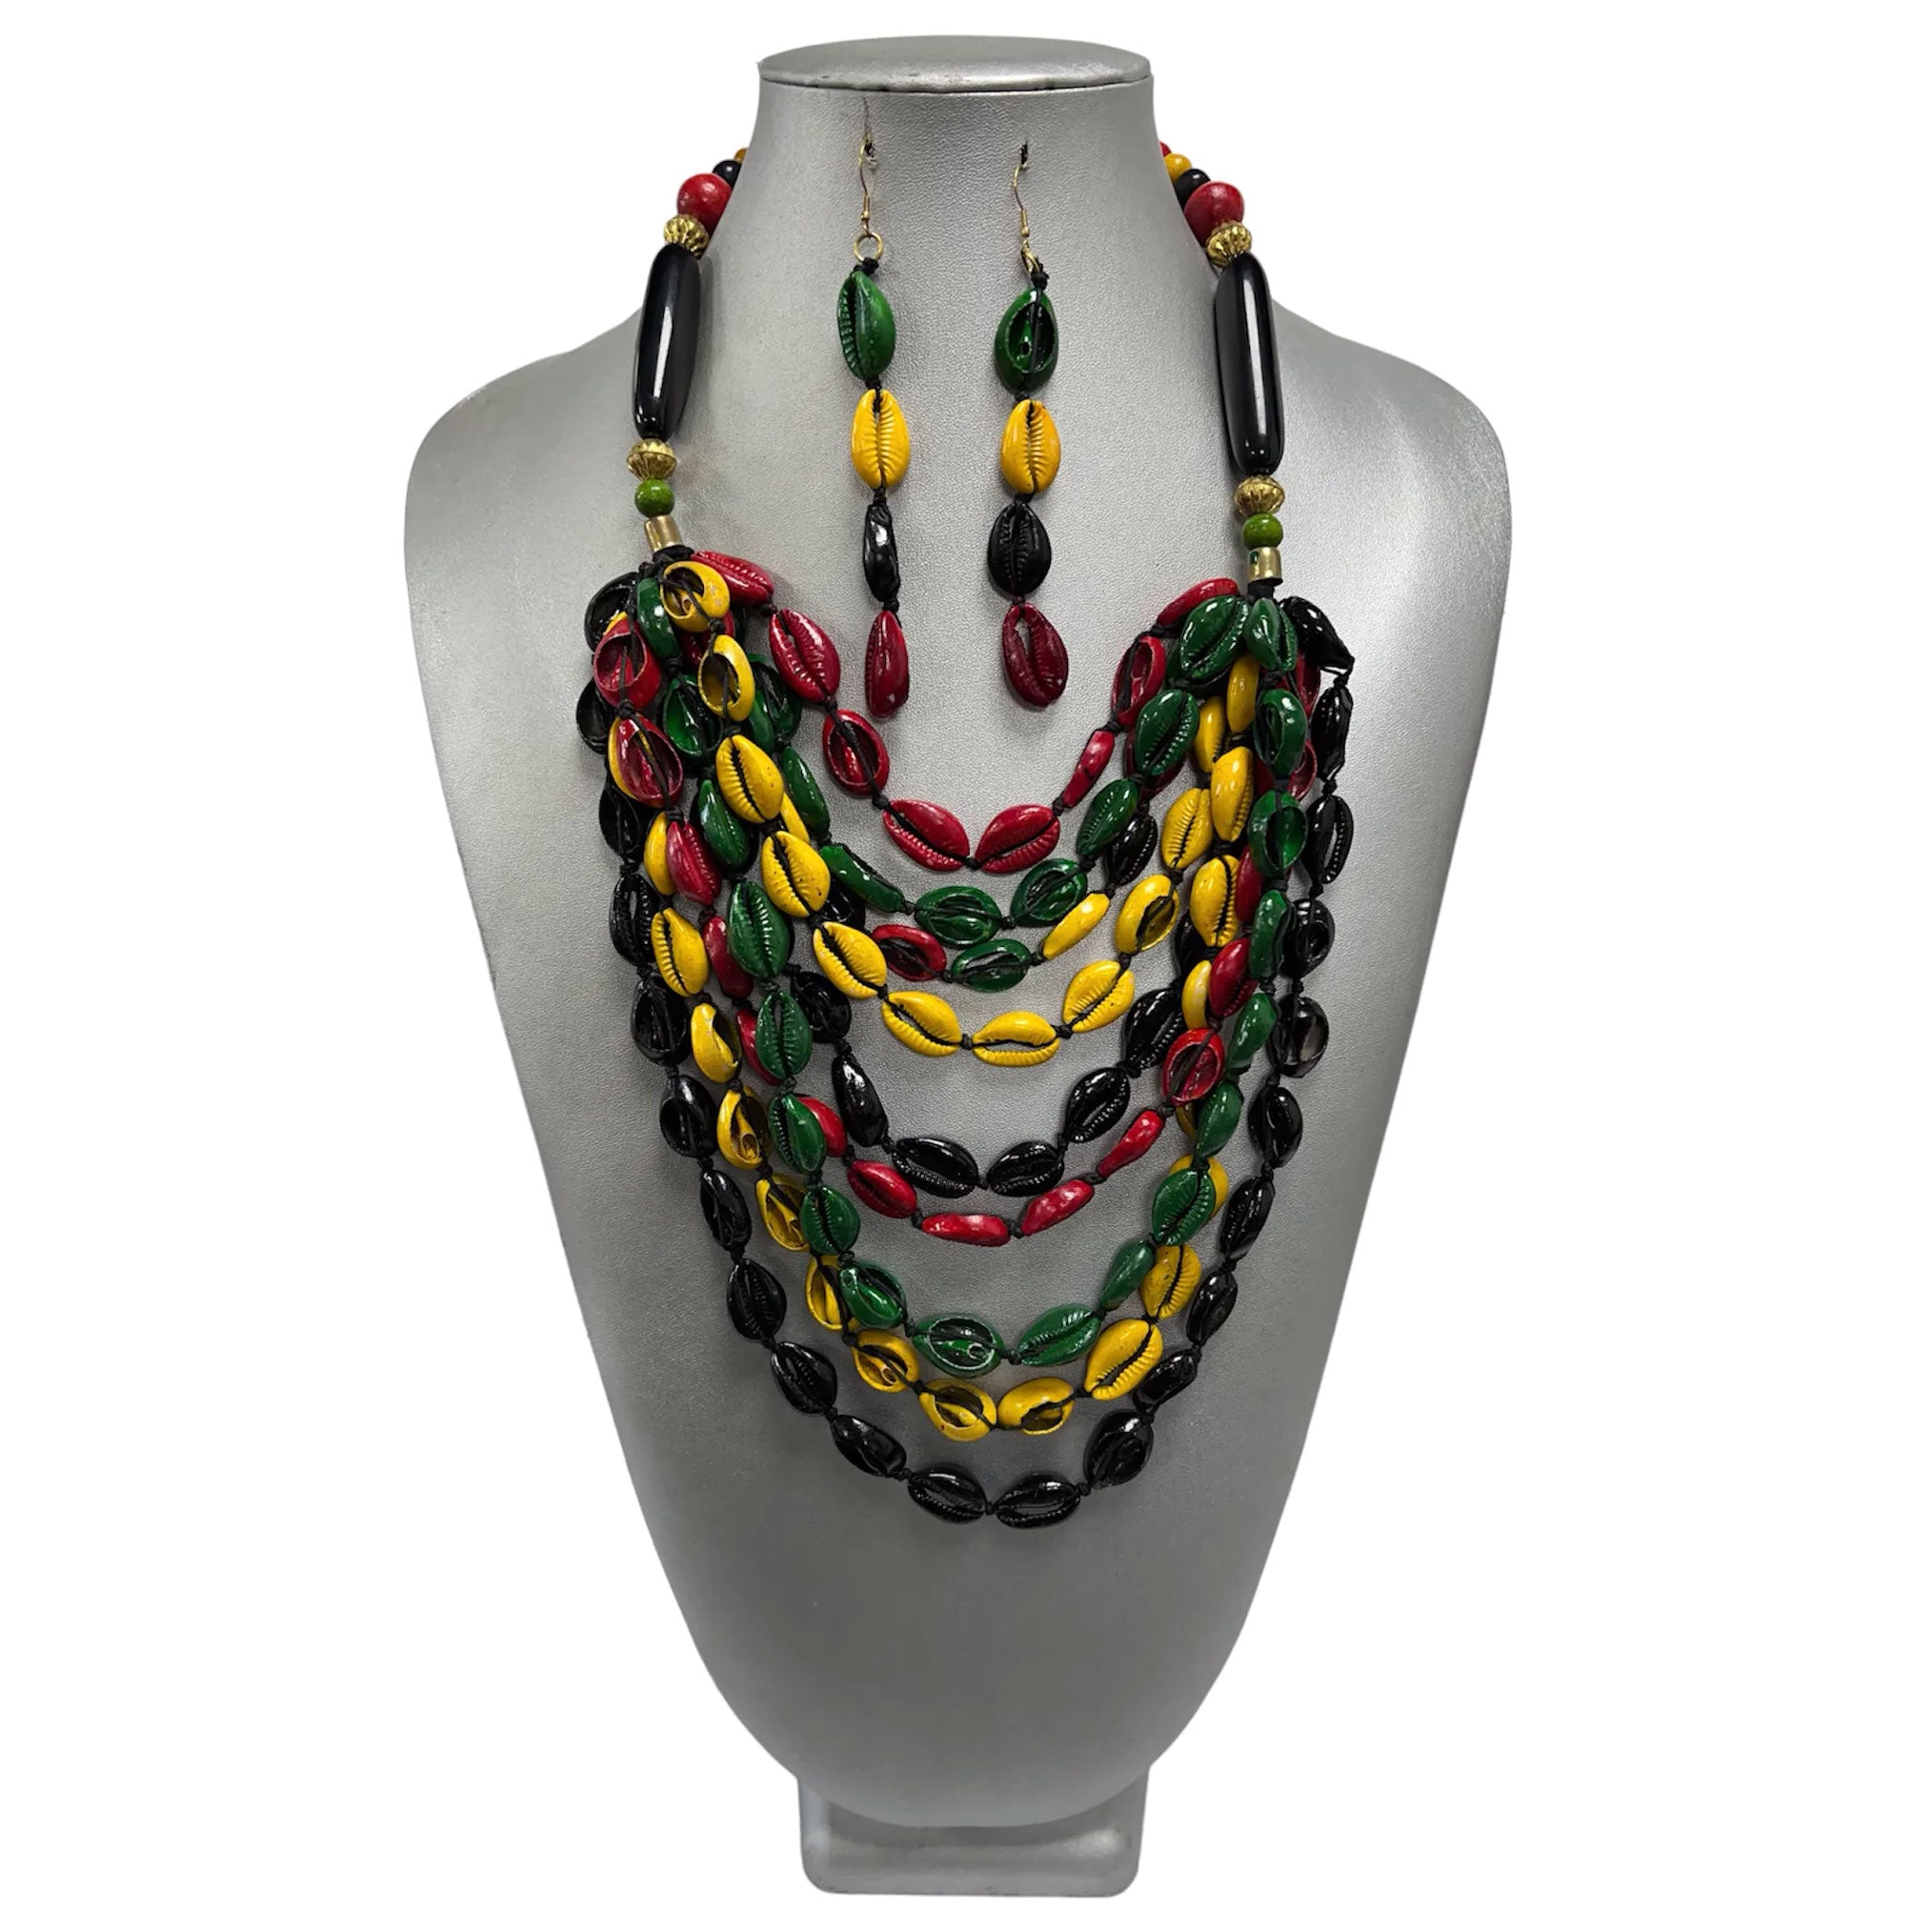 Women's Multi Strand Cowrie Shell Necklace Set